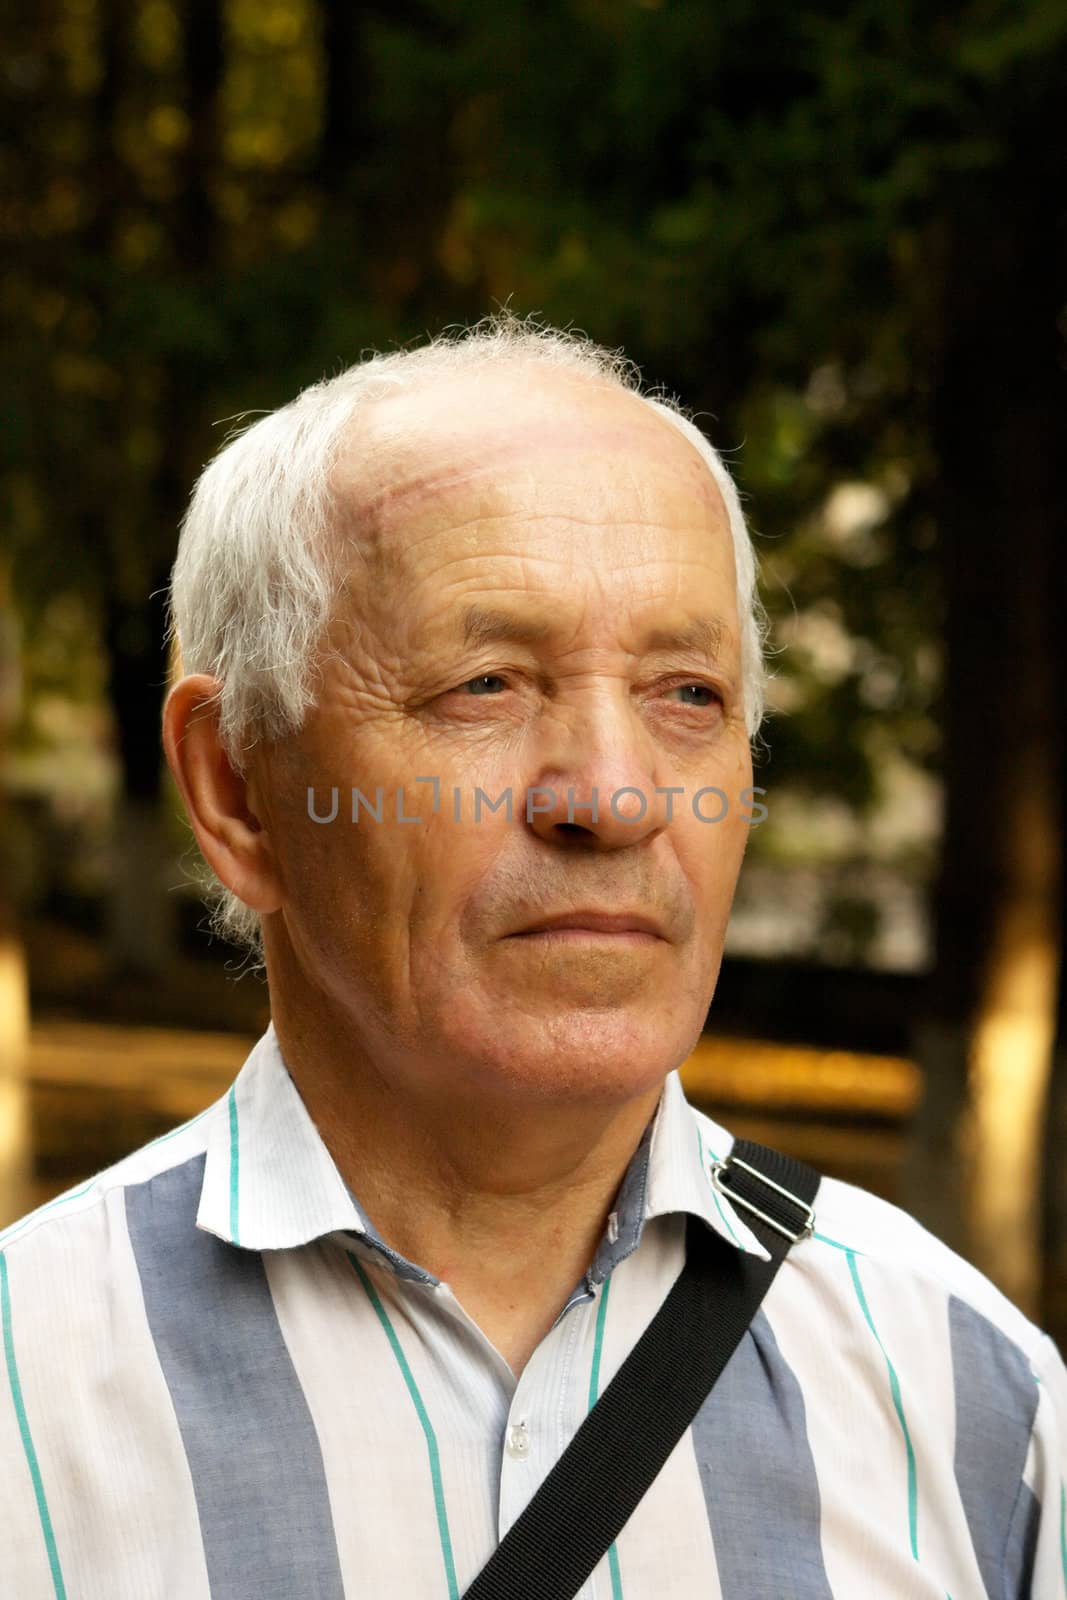 Portrait of the elderly man in a striped shirt against the nature